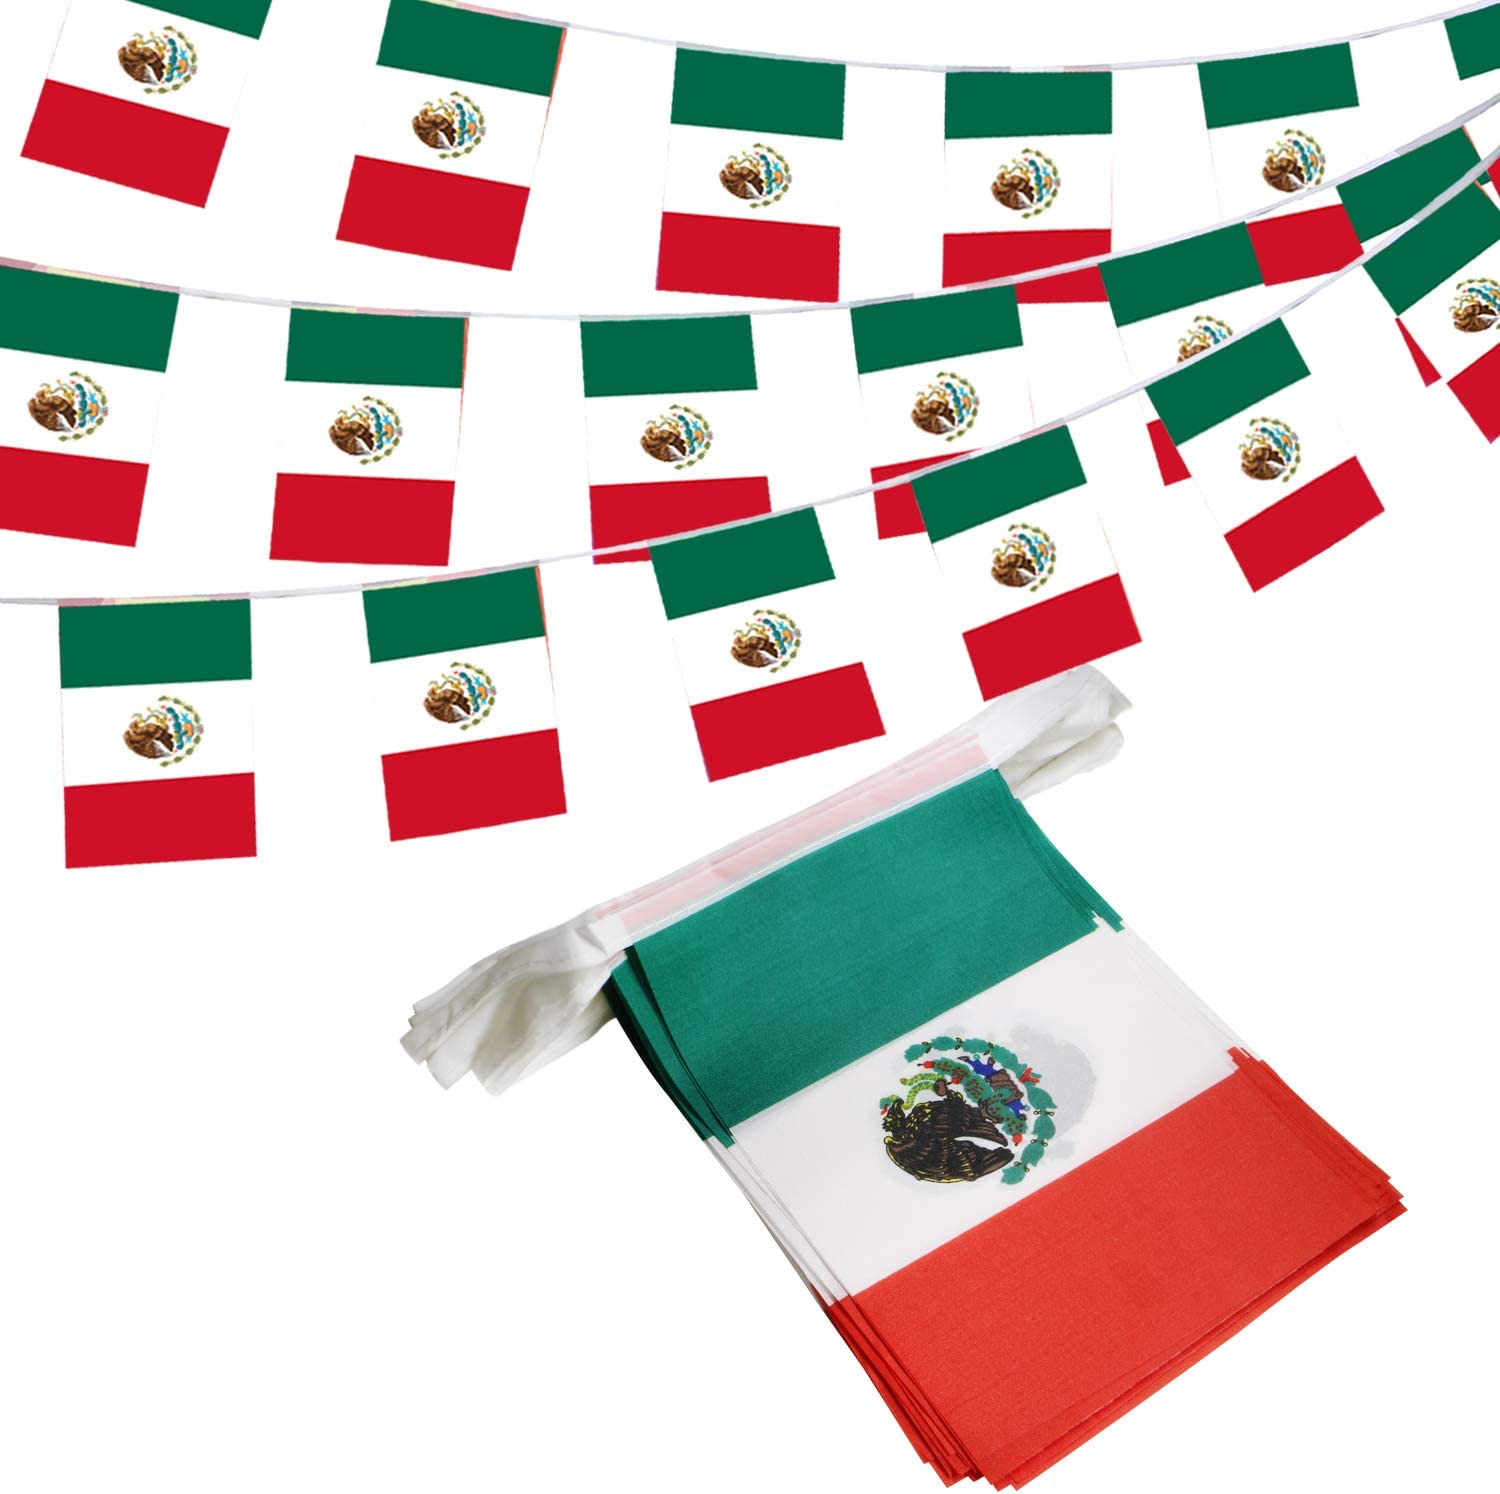 2022 World Cup - Mexico Flag